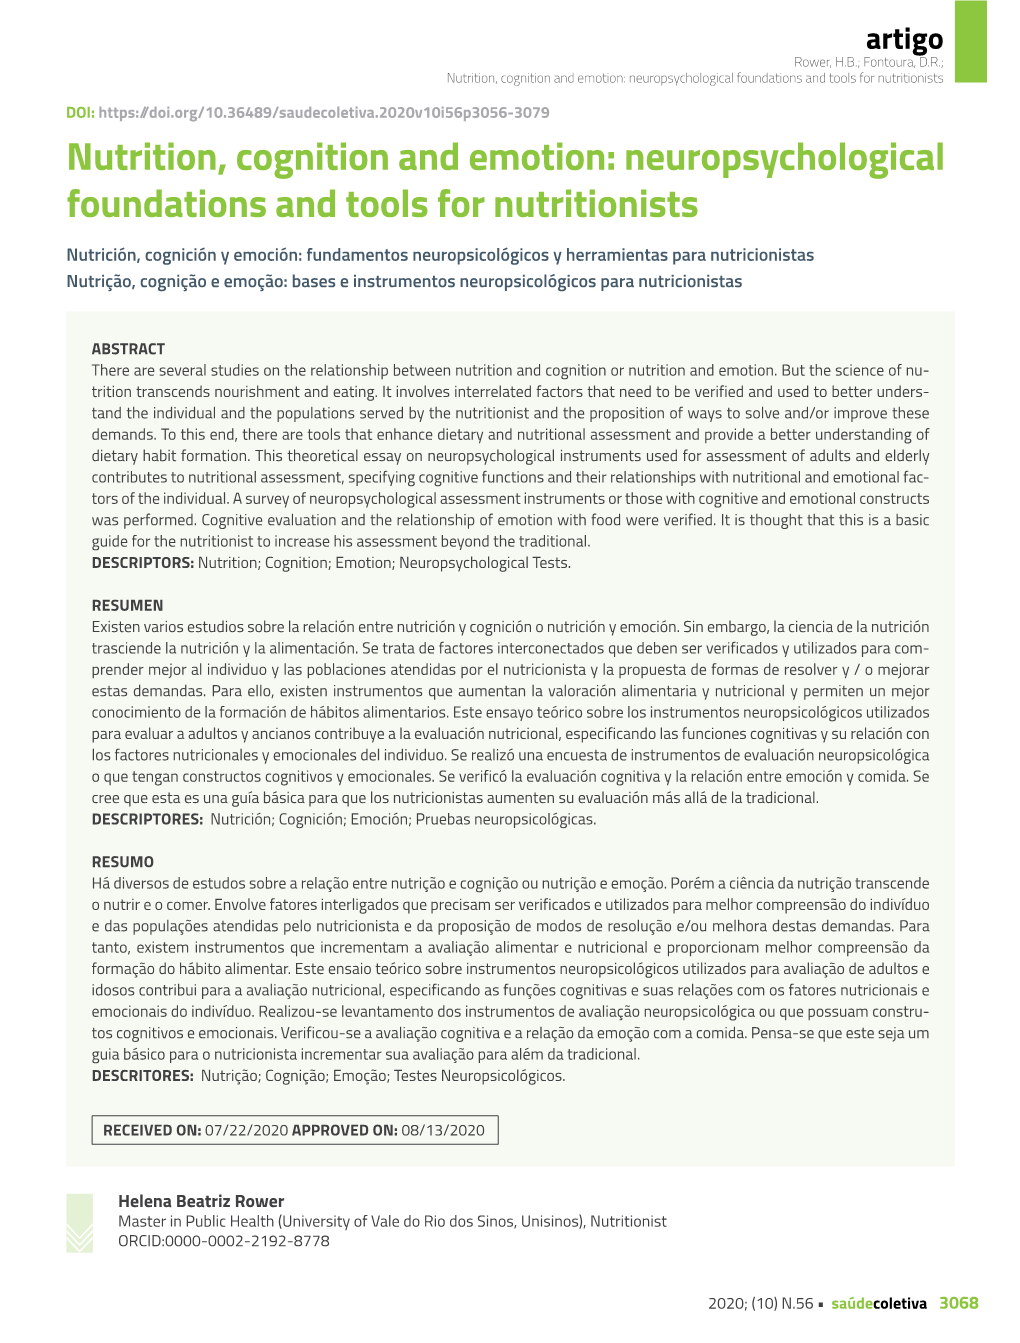 Nutrition, Cognition and Emotion: Neuropsychological Foundations and Tools for Nutritionists